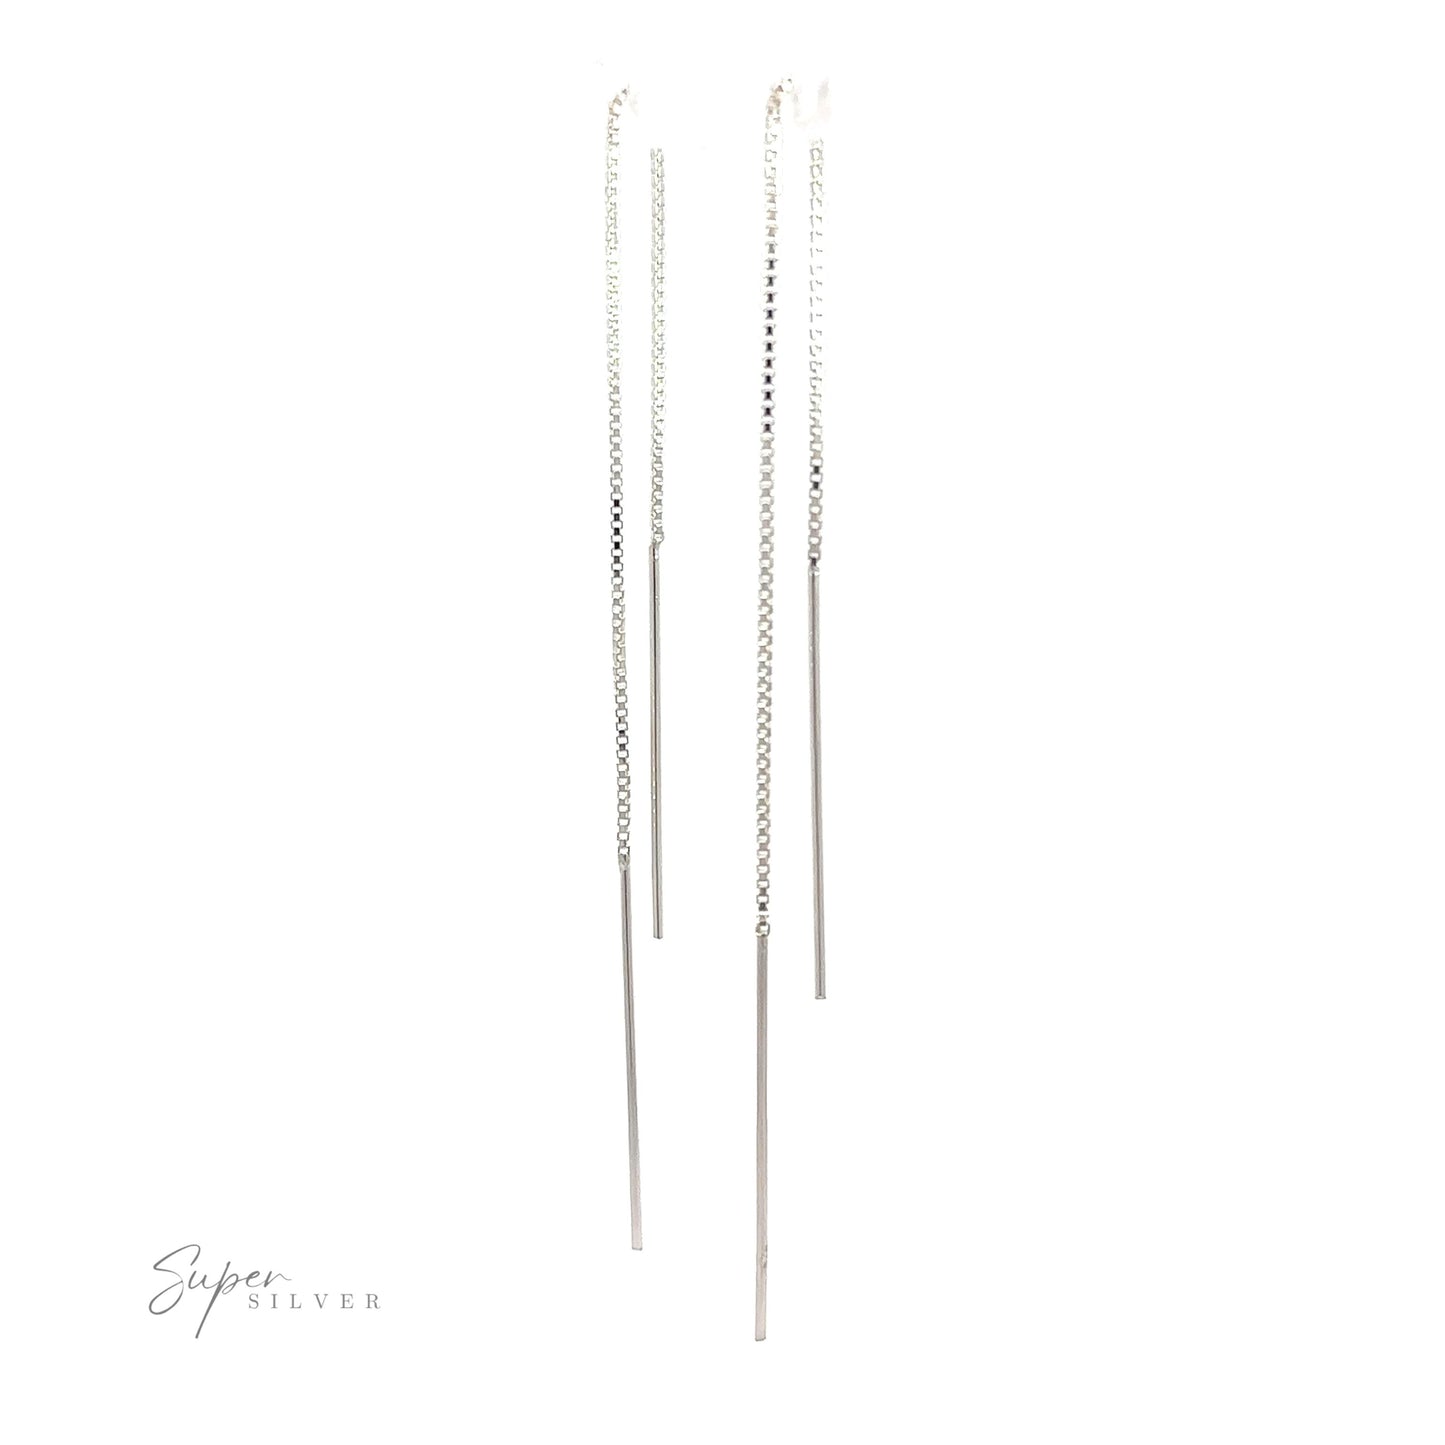 Minimalist and sleek, these Simple Silver Wire Threader earrings are elegantly displayed on a white background.